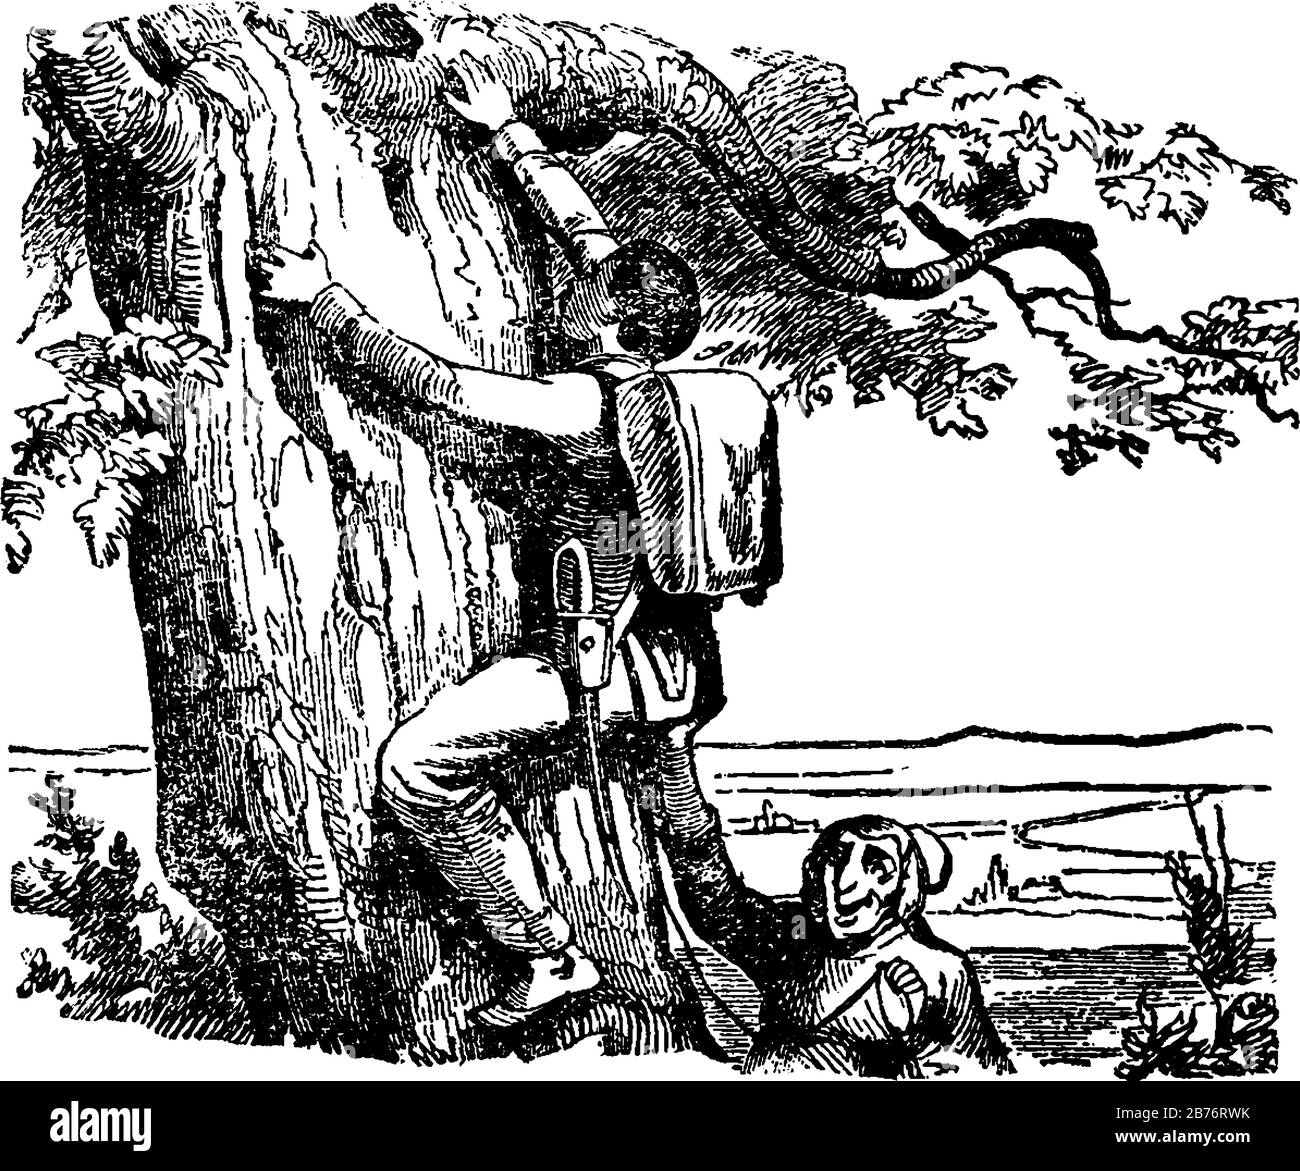 A man climbing tree and another man standing near tree giving support to him, vintage line drawing or engraving illustration Stock Vector